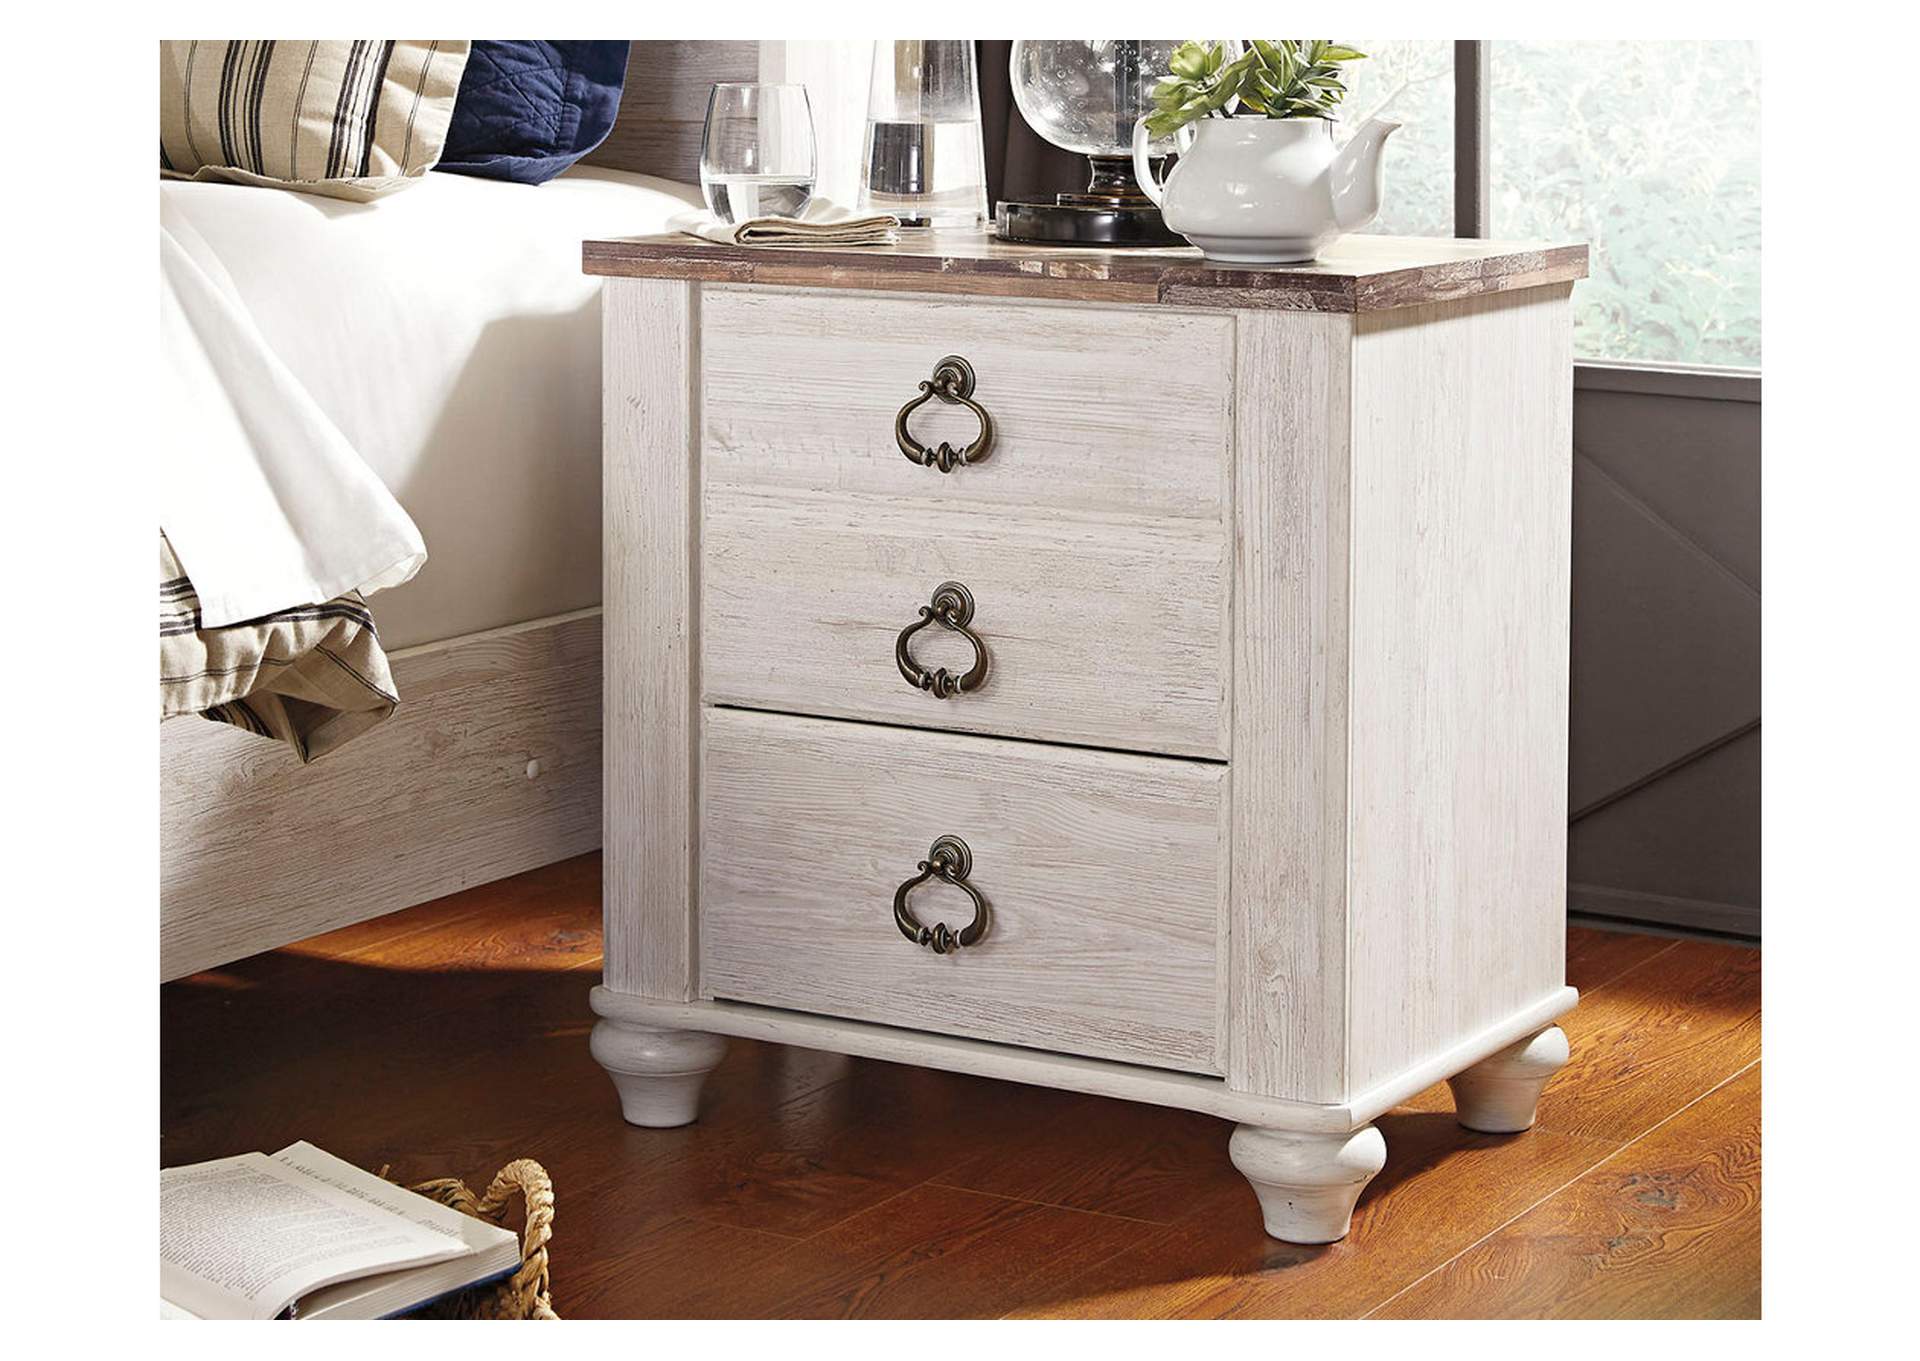 Willowton King Sleigh Bed, Dresser and Nightstand,Signature Design By Ashley